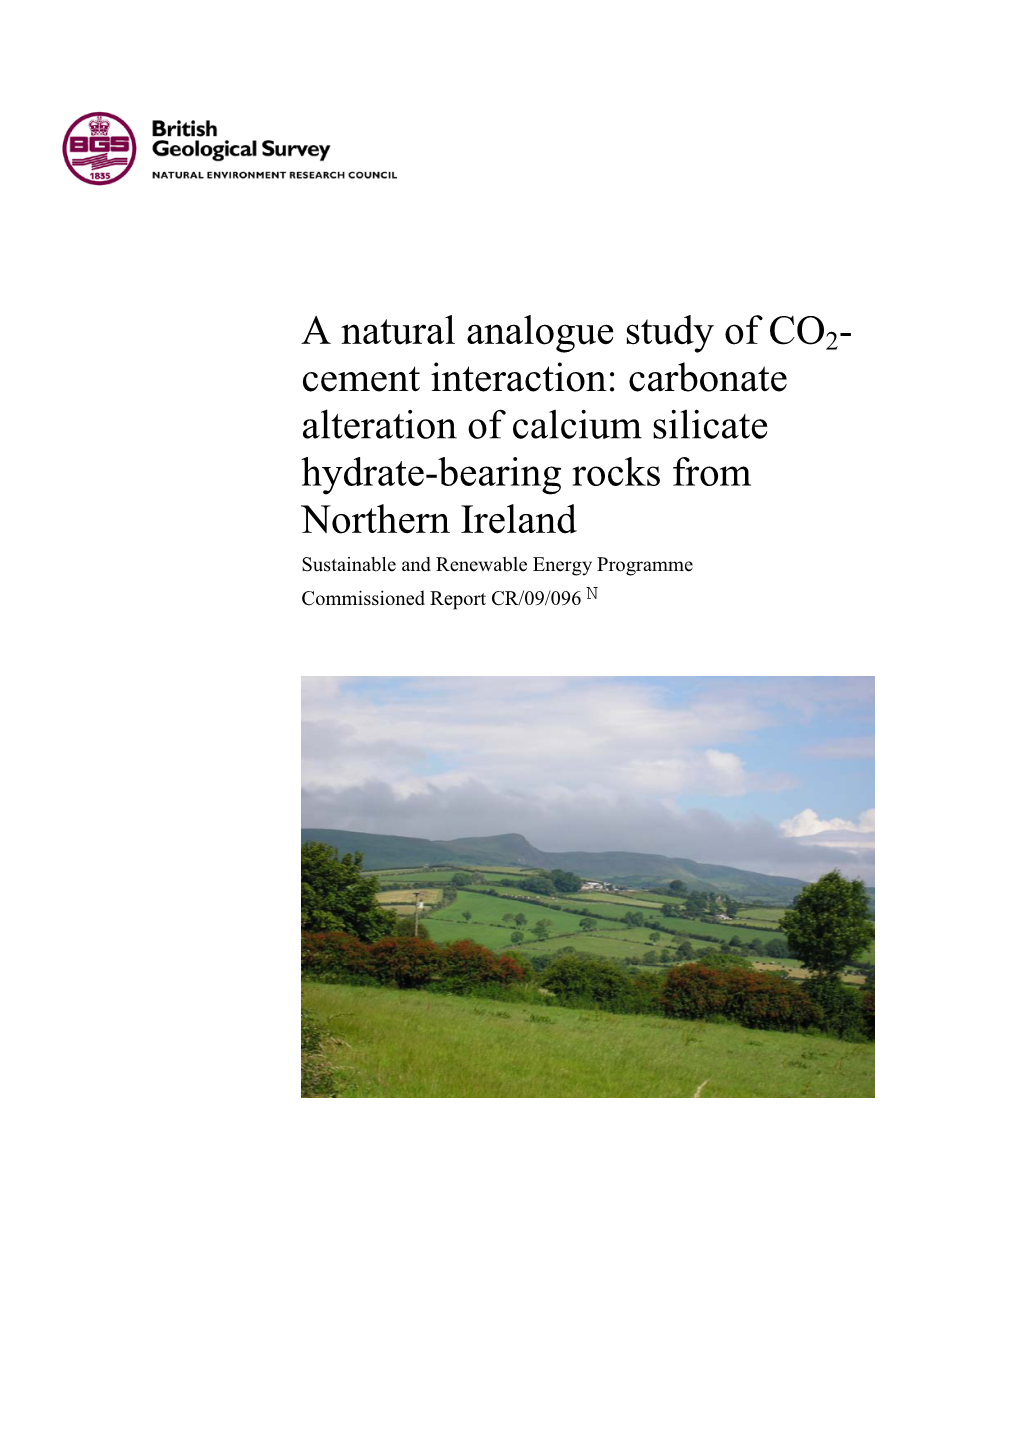 A Natural Analogue Study of CO2-Cement Interaction: Carbonate Alteration of Calcium Silicate Hydrate-Bearing Rocks from Northern Ireland